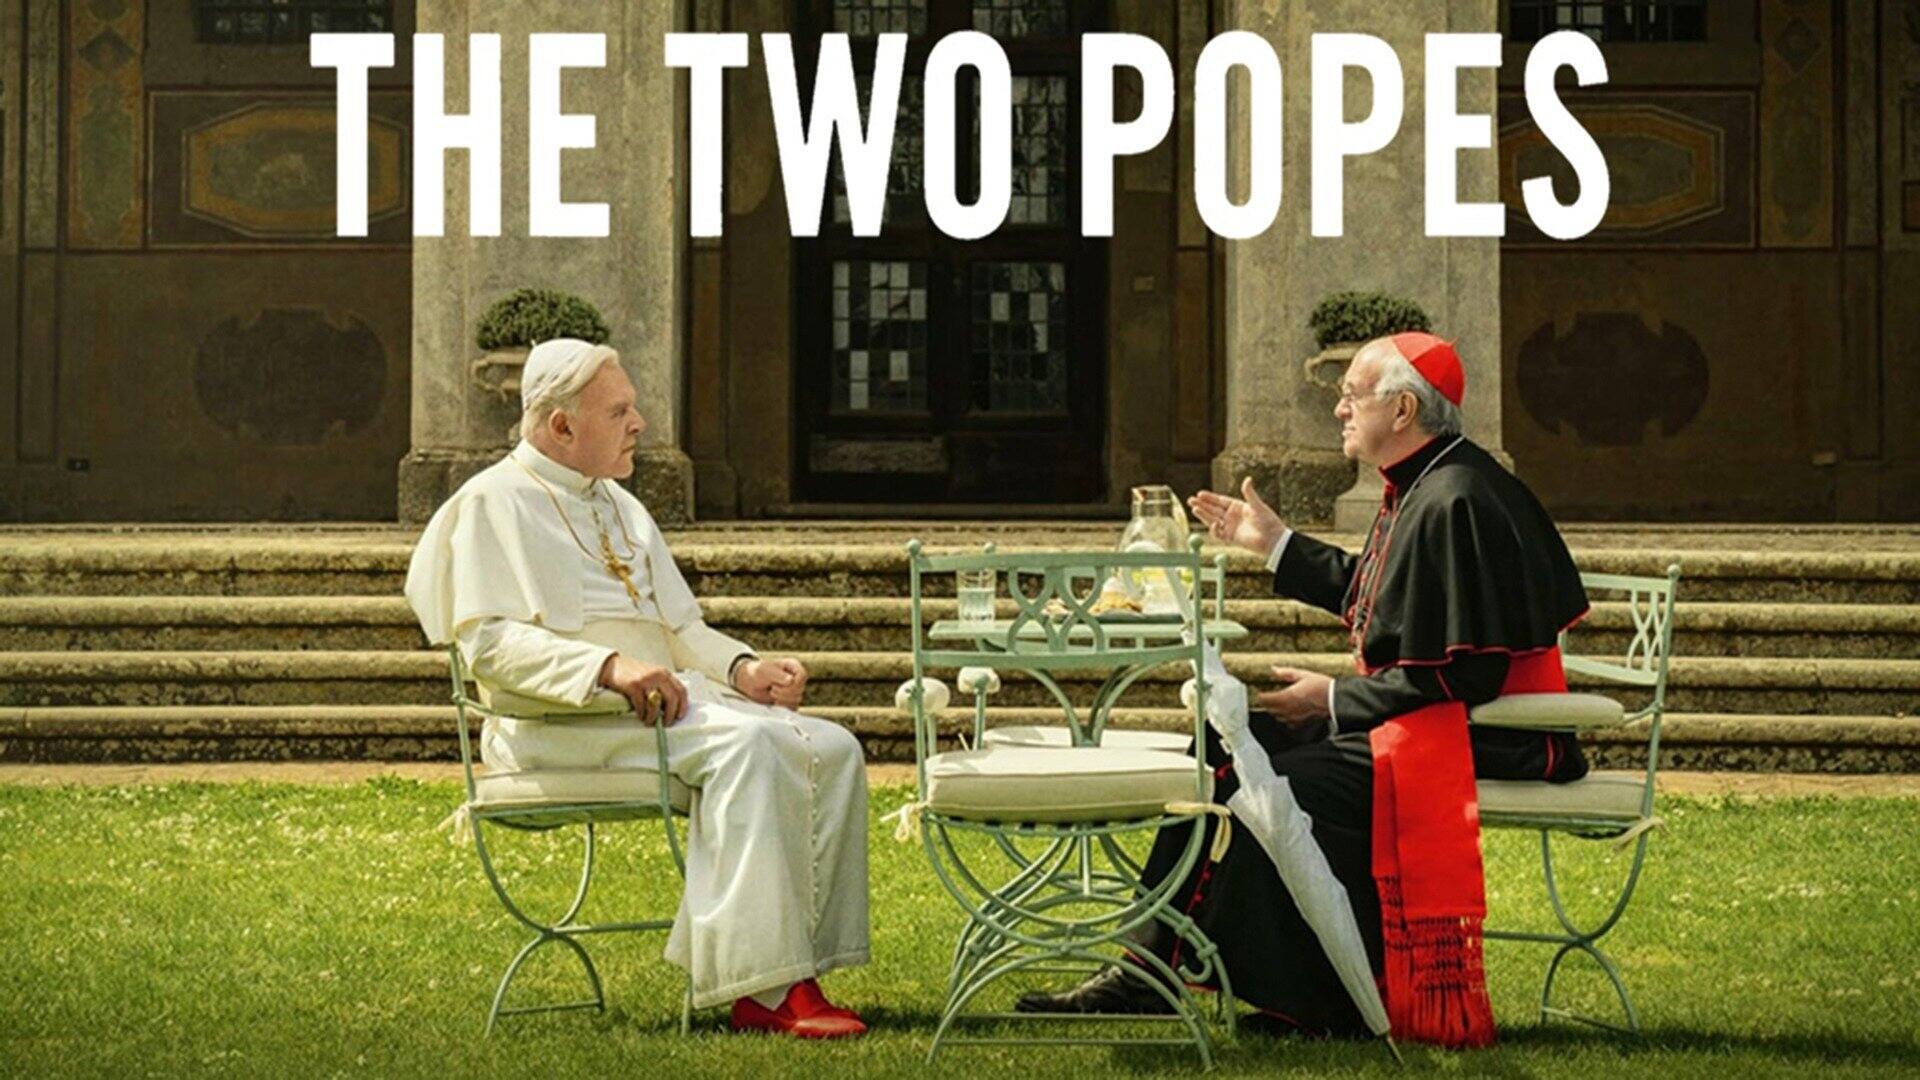 37-facts-about-the-movie-the-two-popes